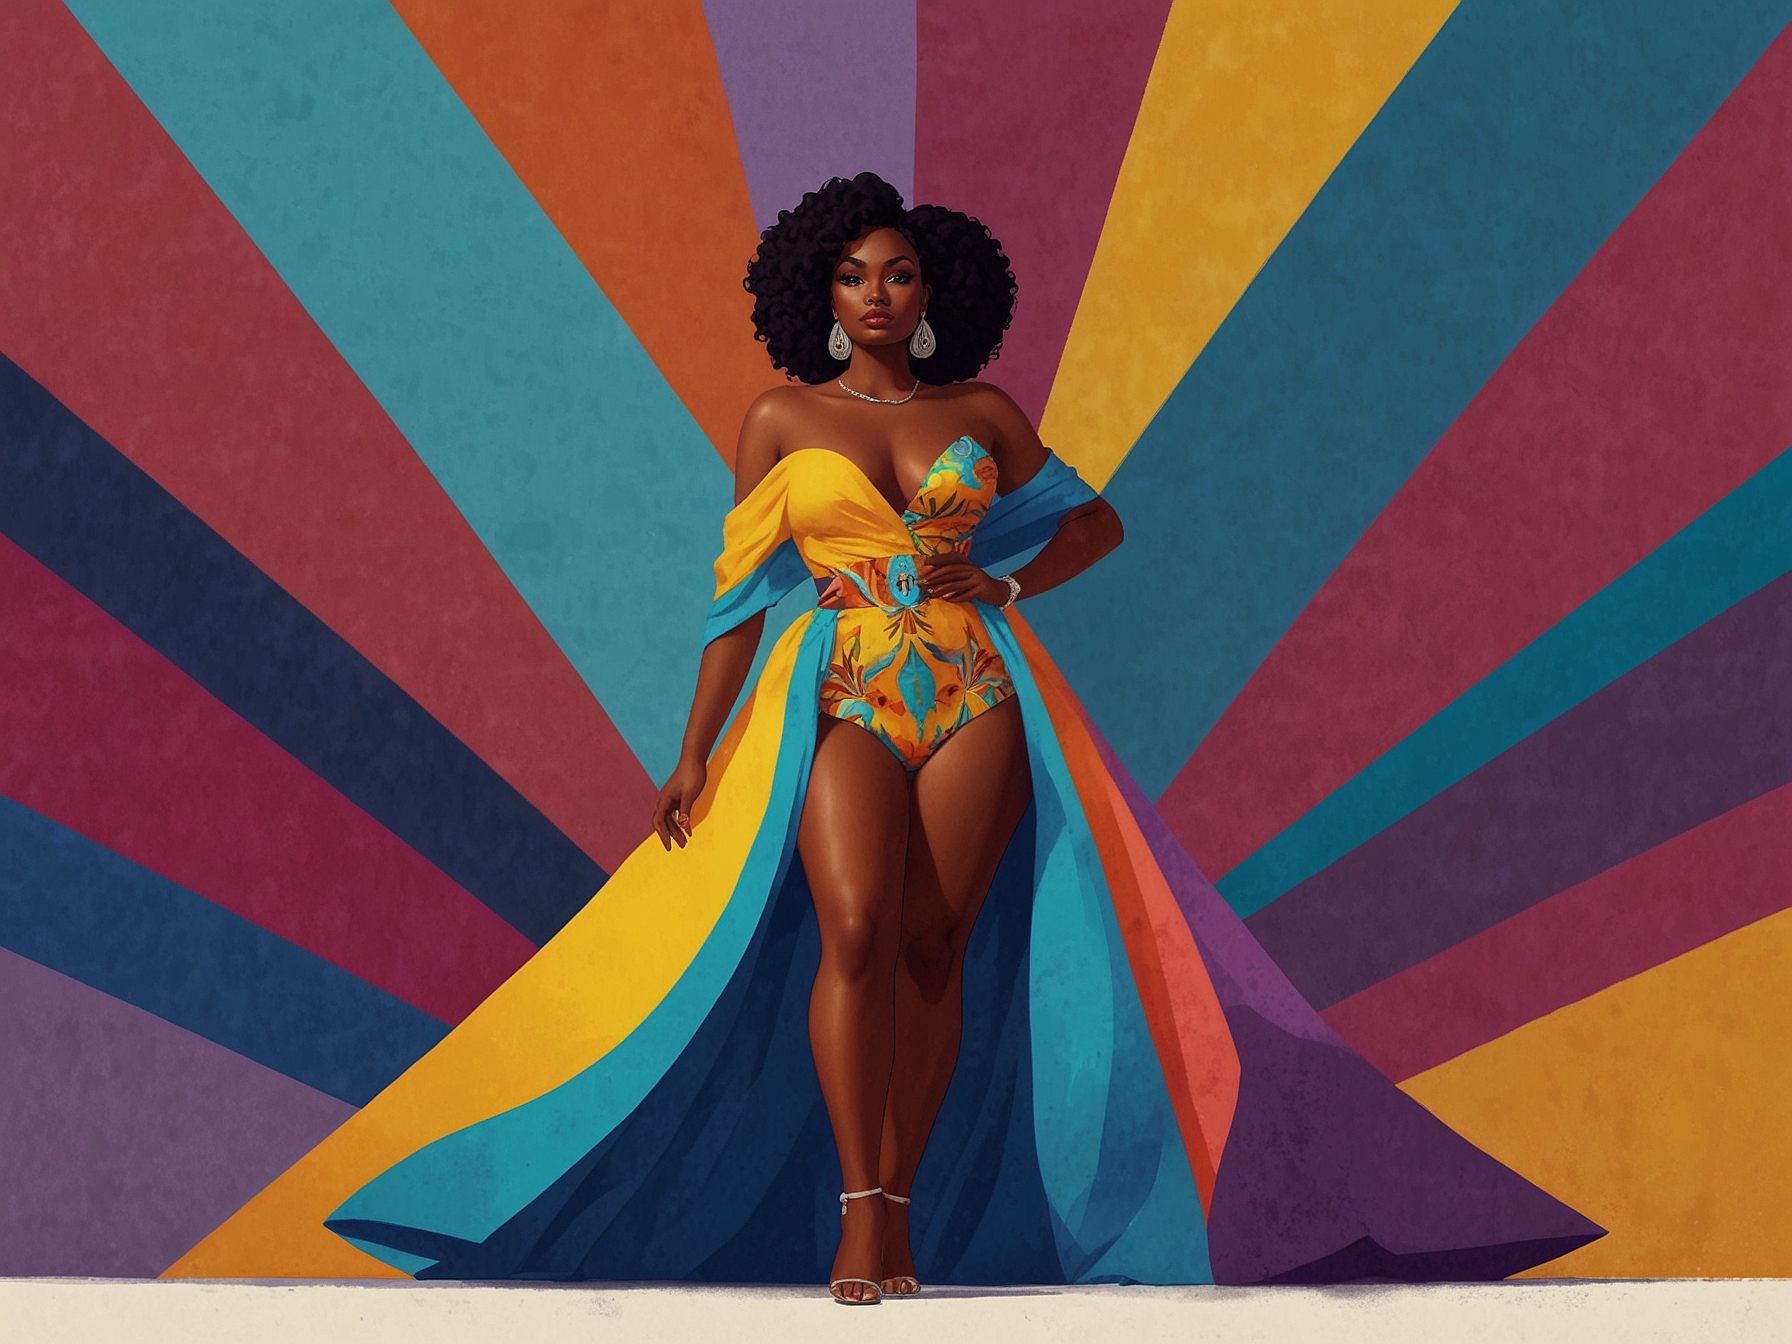 Ice Spice in a vibrant outfit flaunting her curves and exuding confidence, set against a colorful backdrop, making a strong visual statement about self-acceptance and empowerment.